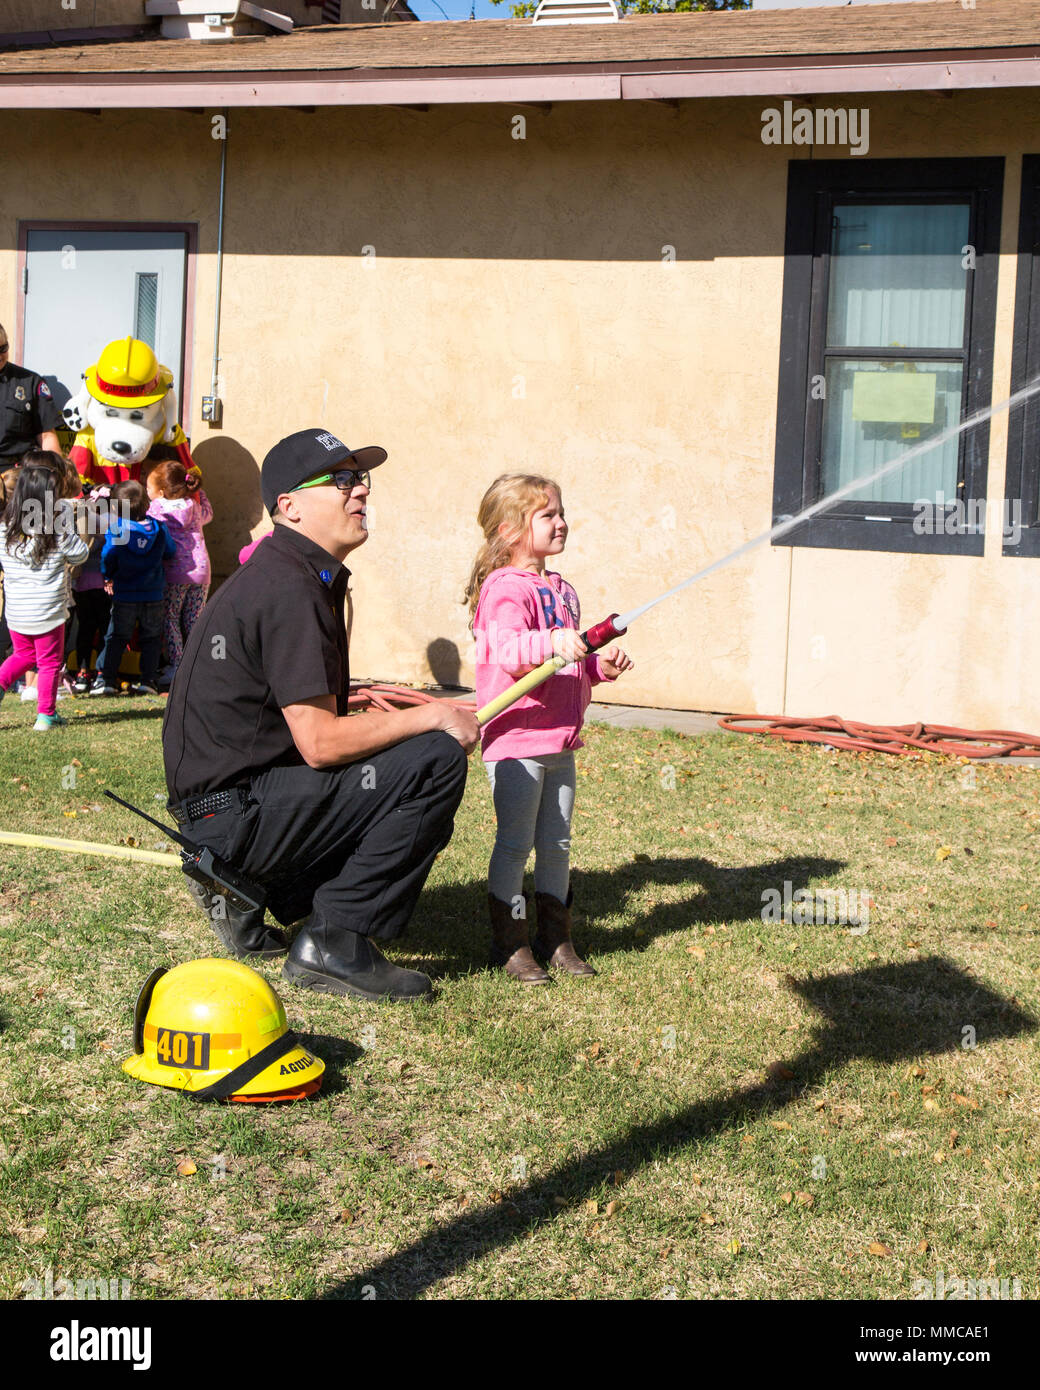 Paul Aguilar, fire prevention officer with Fire and Emergency Services, demonstrates fire hose operations, while Sparky meets children from the Child Development Center during a fire safety tour on Marine Corps Logistics Base Barstow, Calif., Oct. 10. Stock Photo